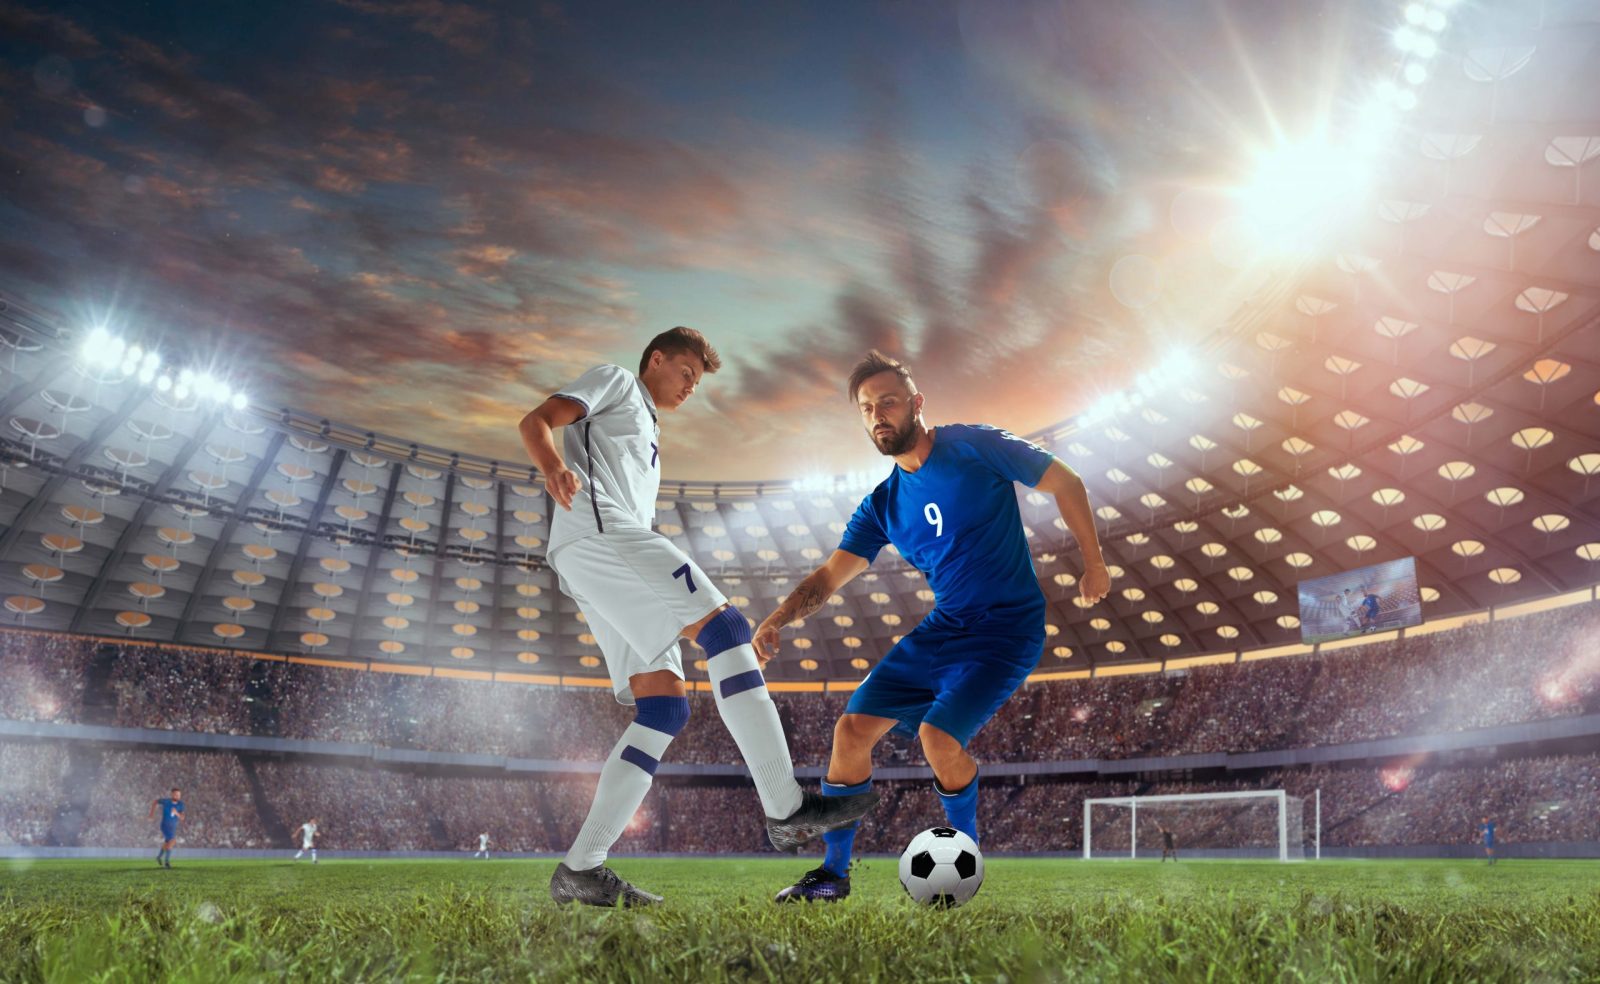 soccer players action professional stadium scaled